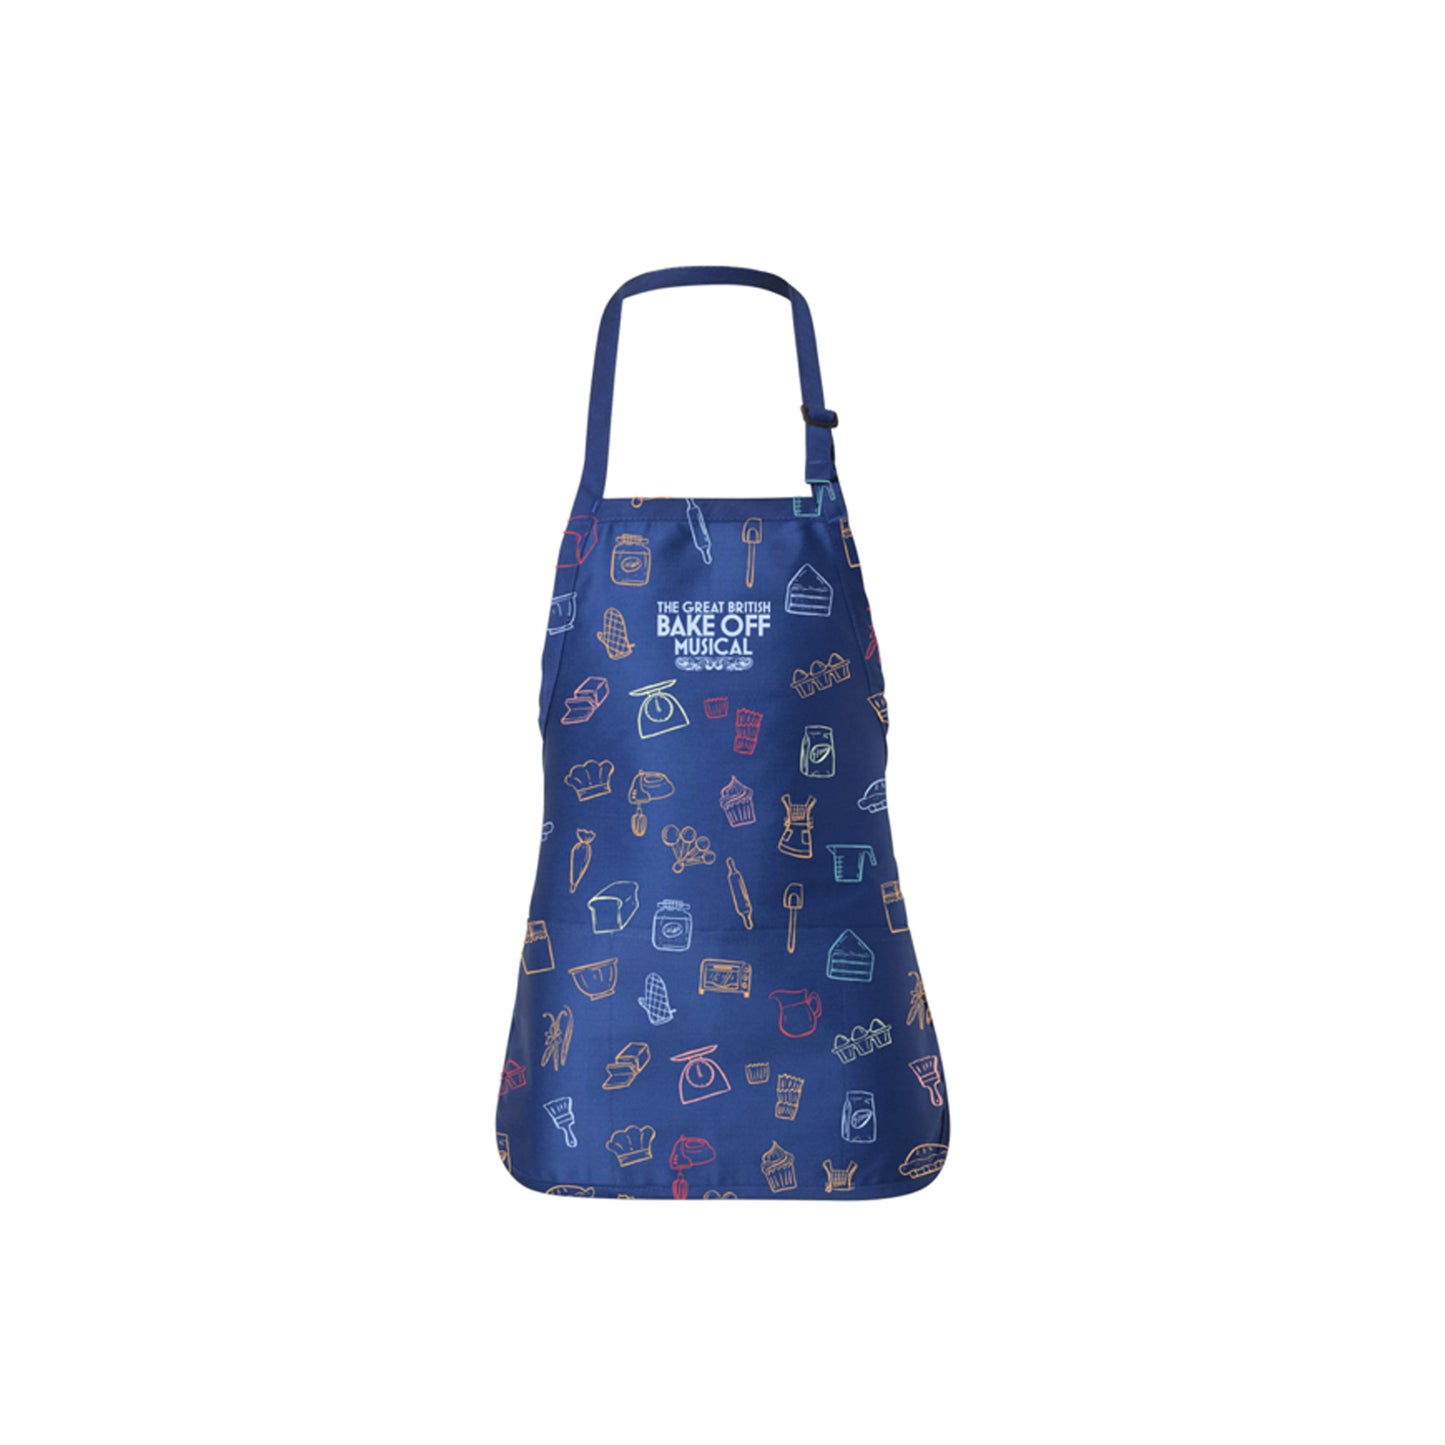 THE GREAT BRITISH BAKE OFF - Apron